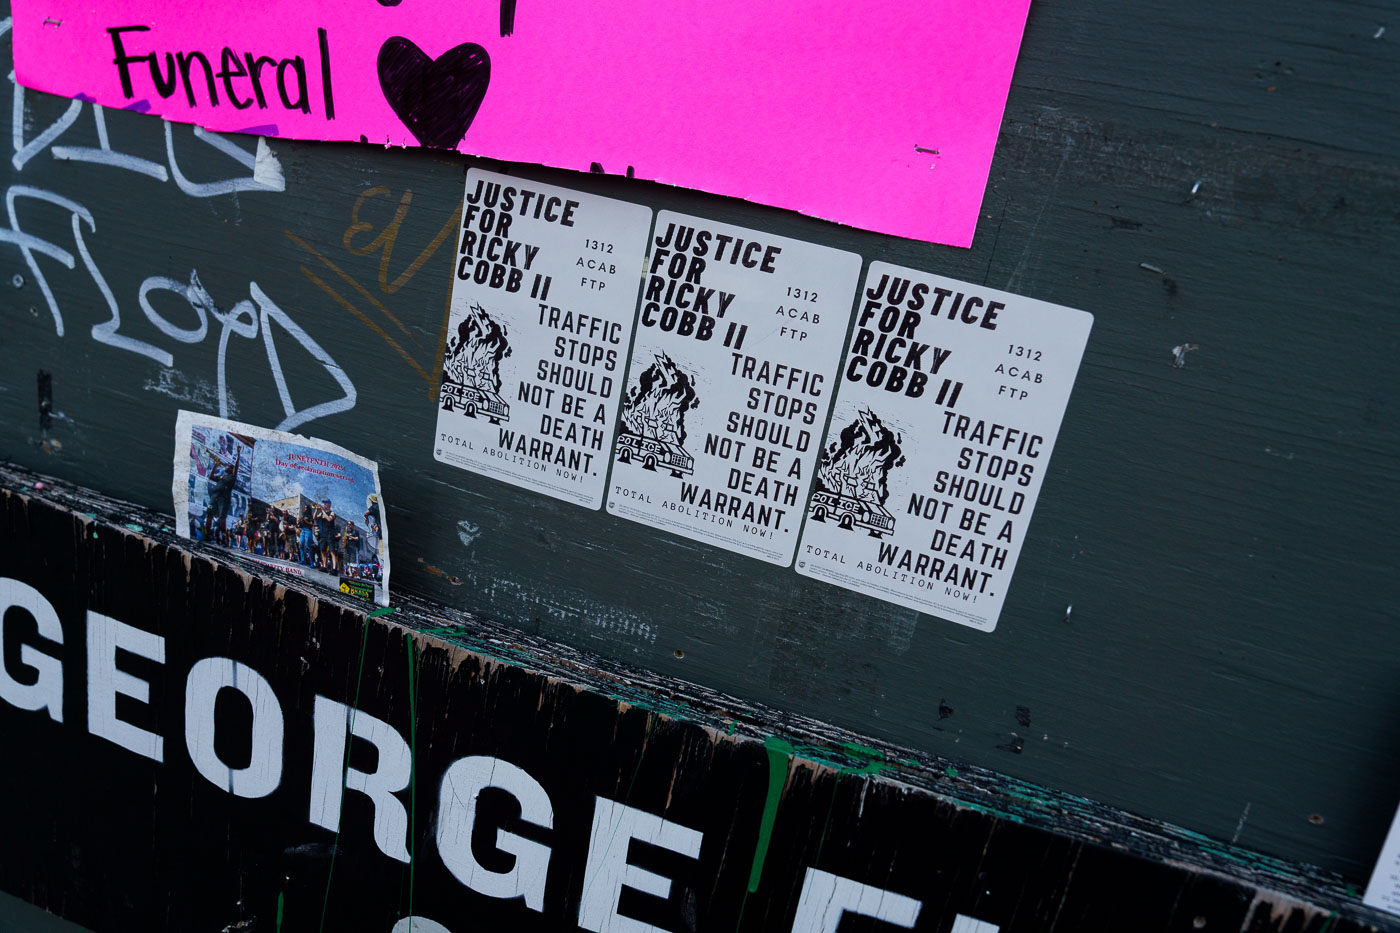 Justice for Ricky Cobb II stickers